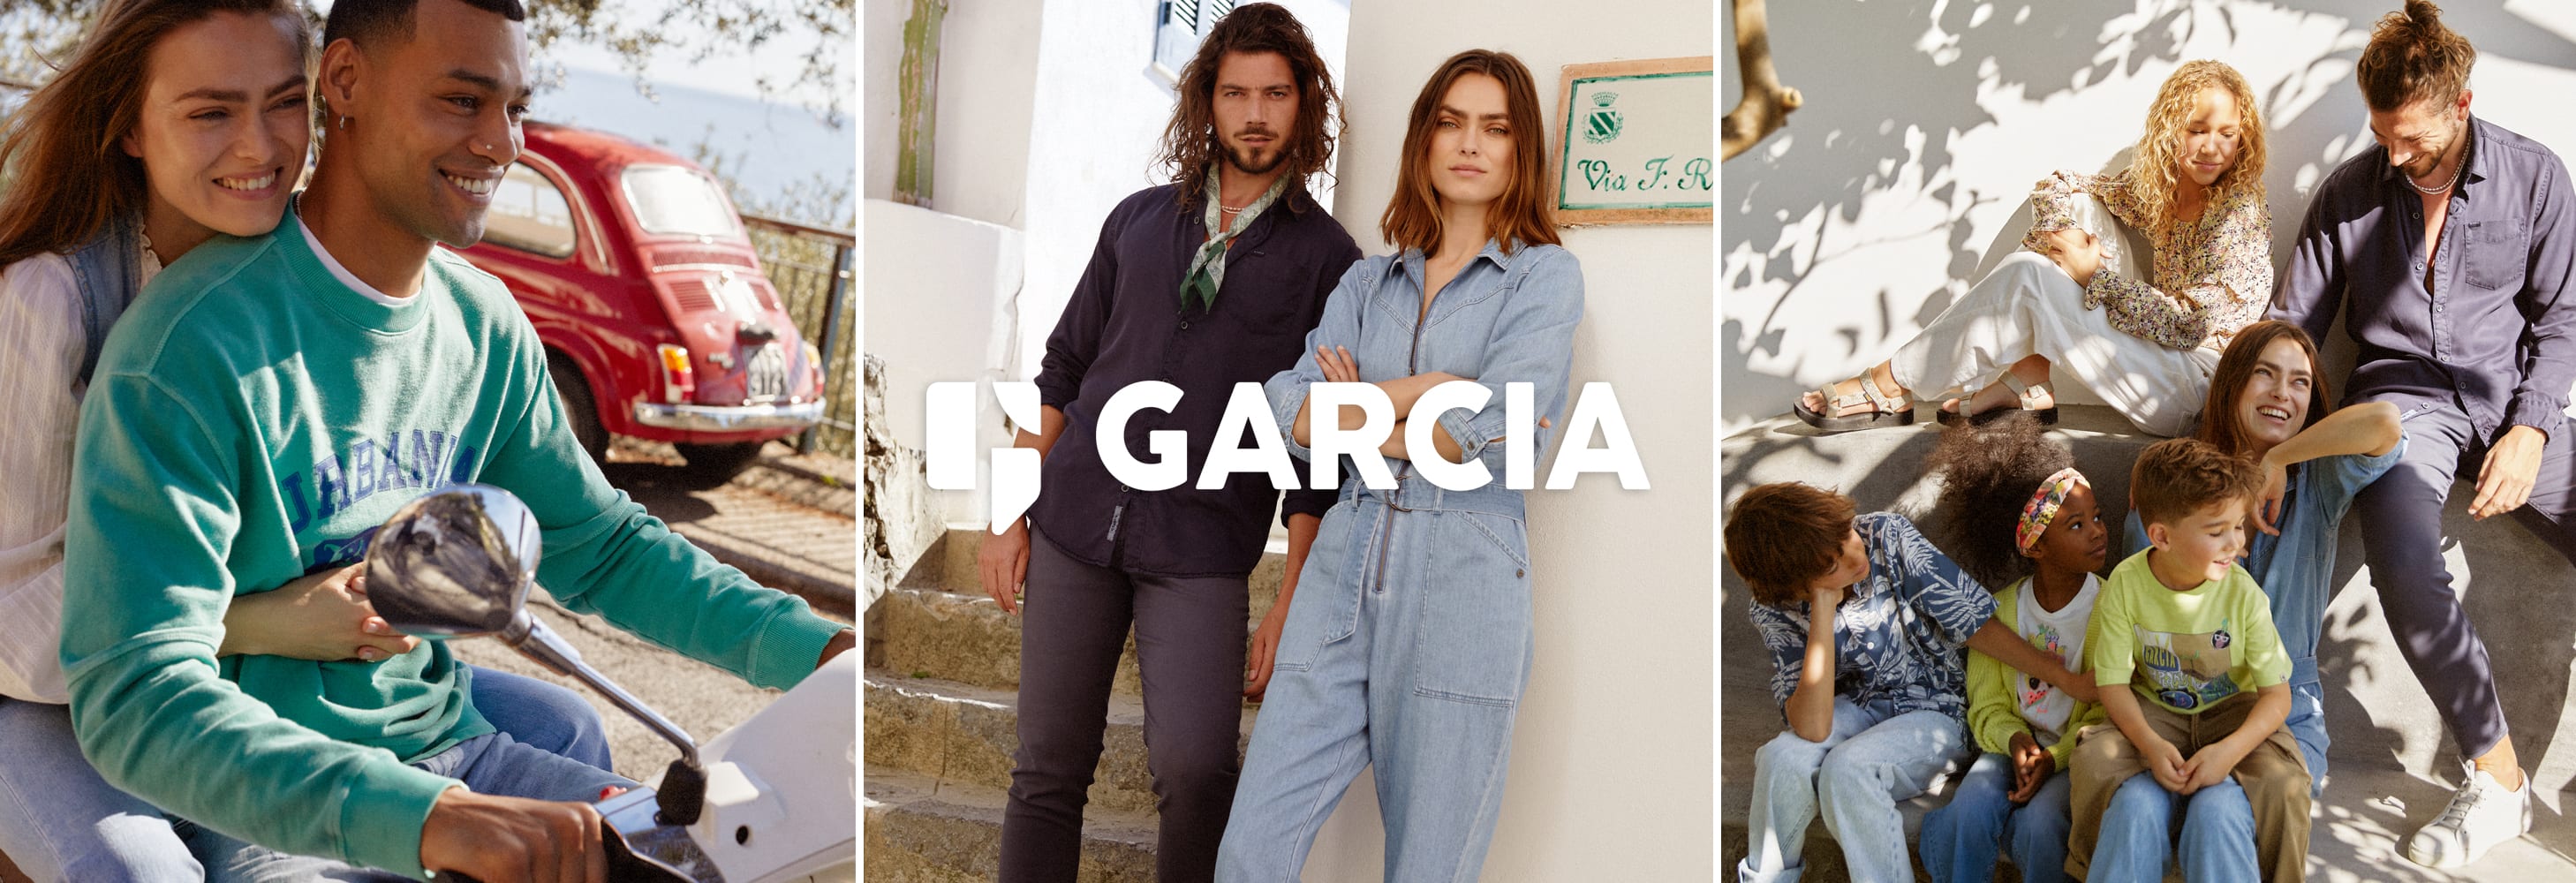 Garcia kleding kopen | There for fashion | Jeans Centre